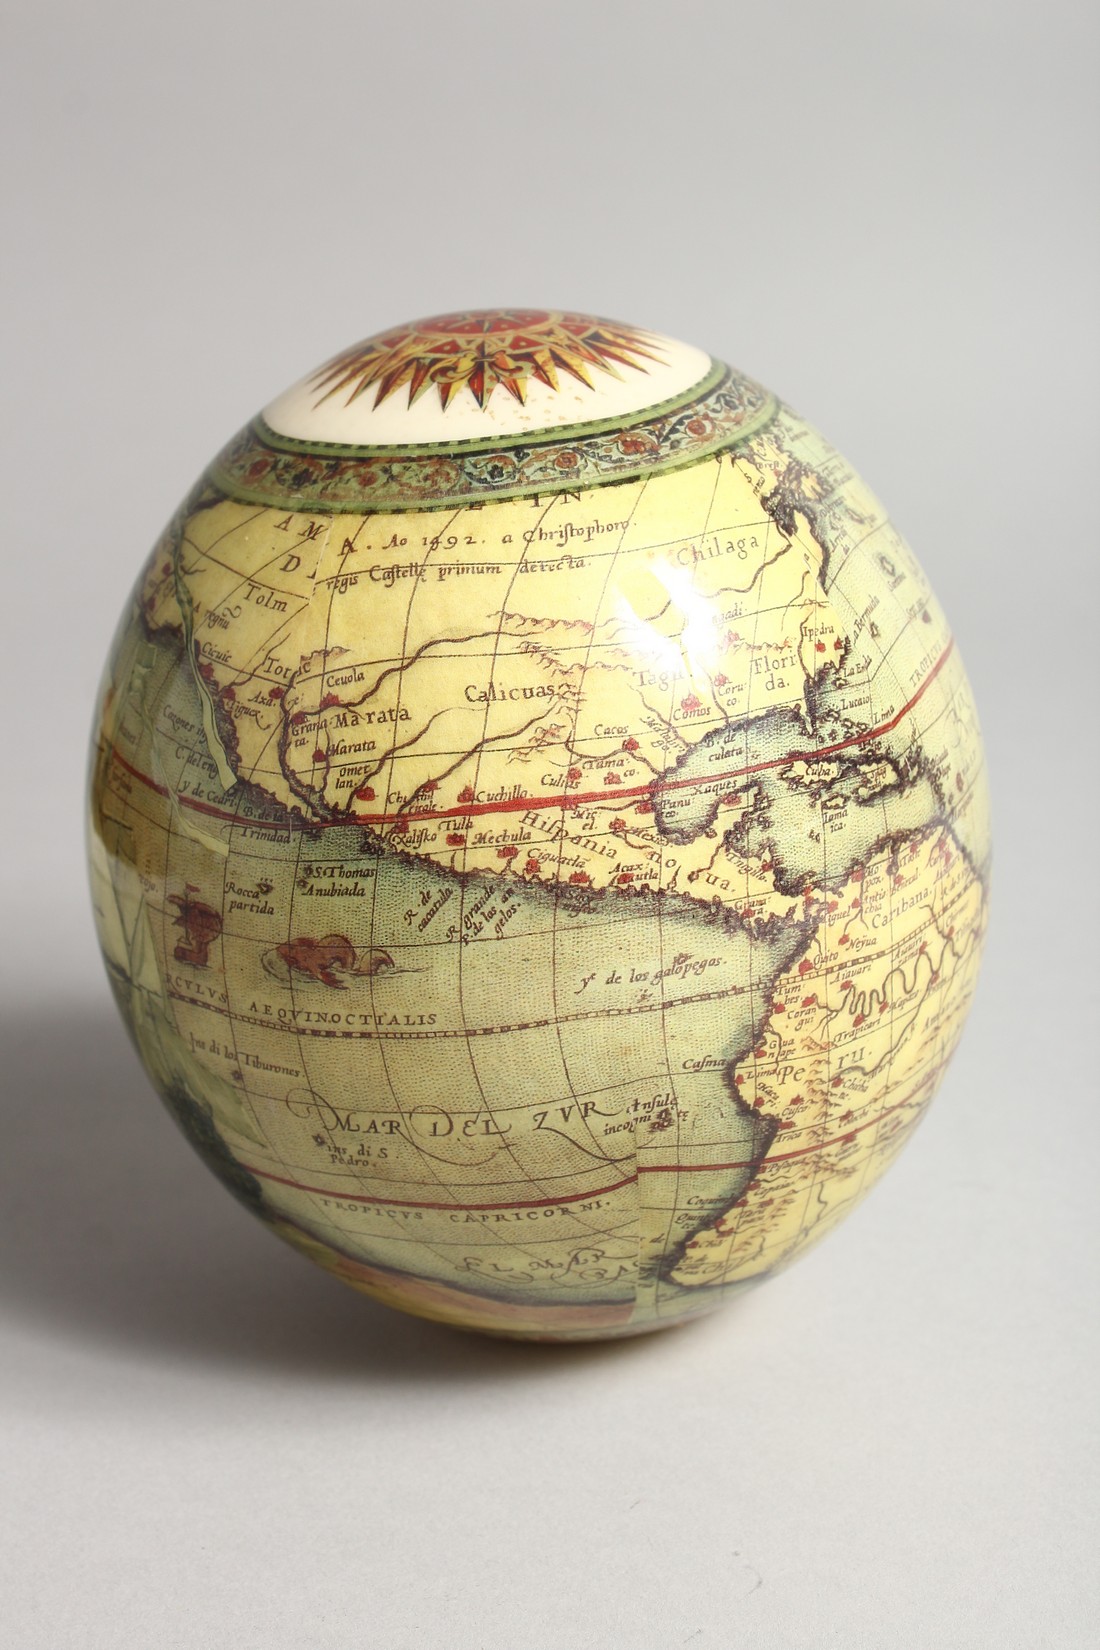 A LARGE EGG OF THE WORLD 6ins high. - Image 4 of 6